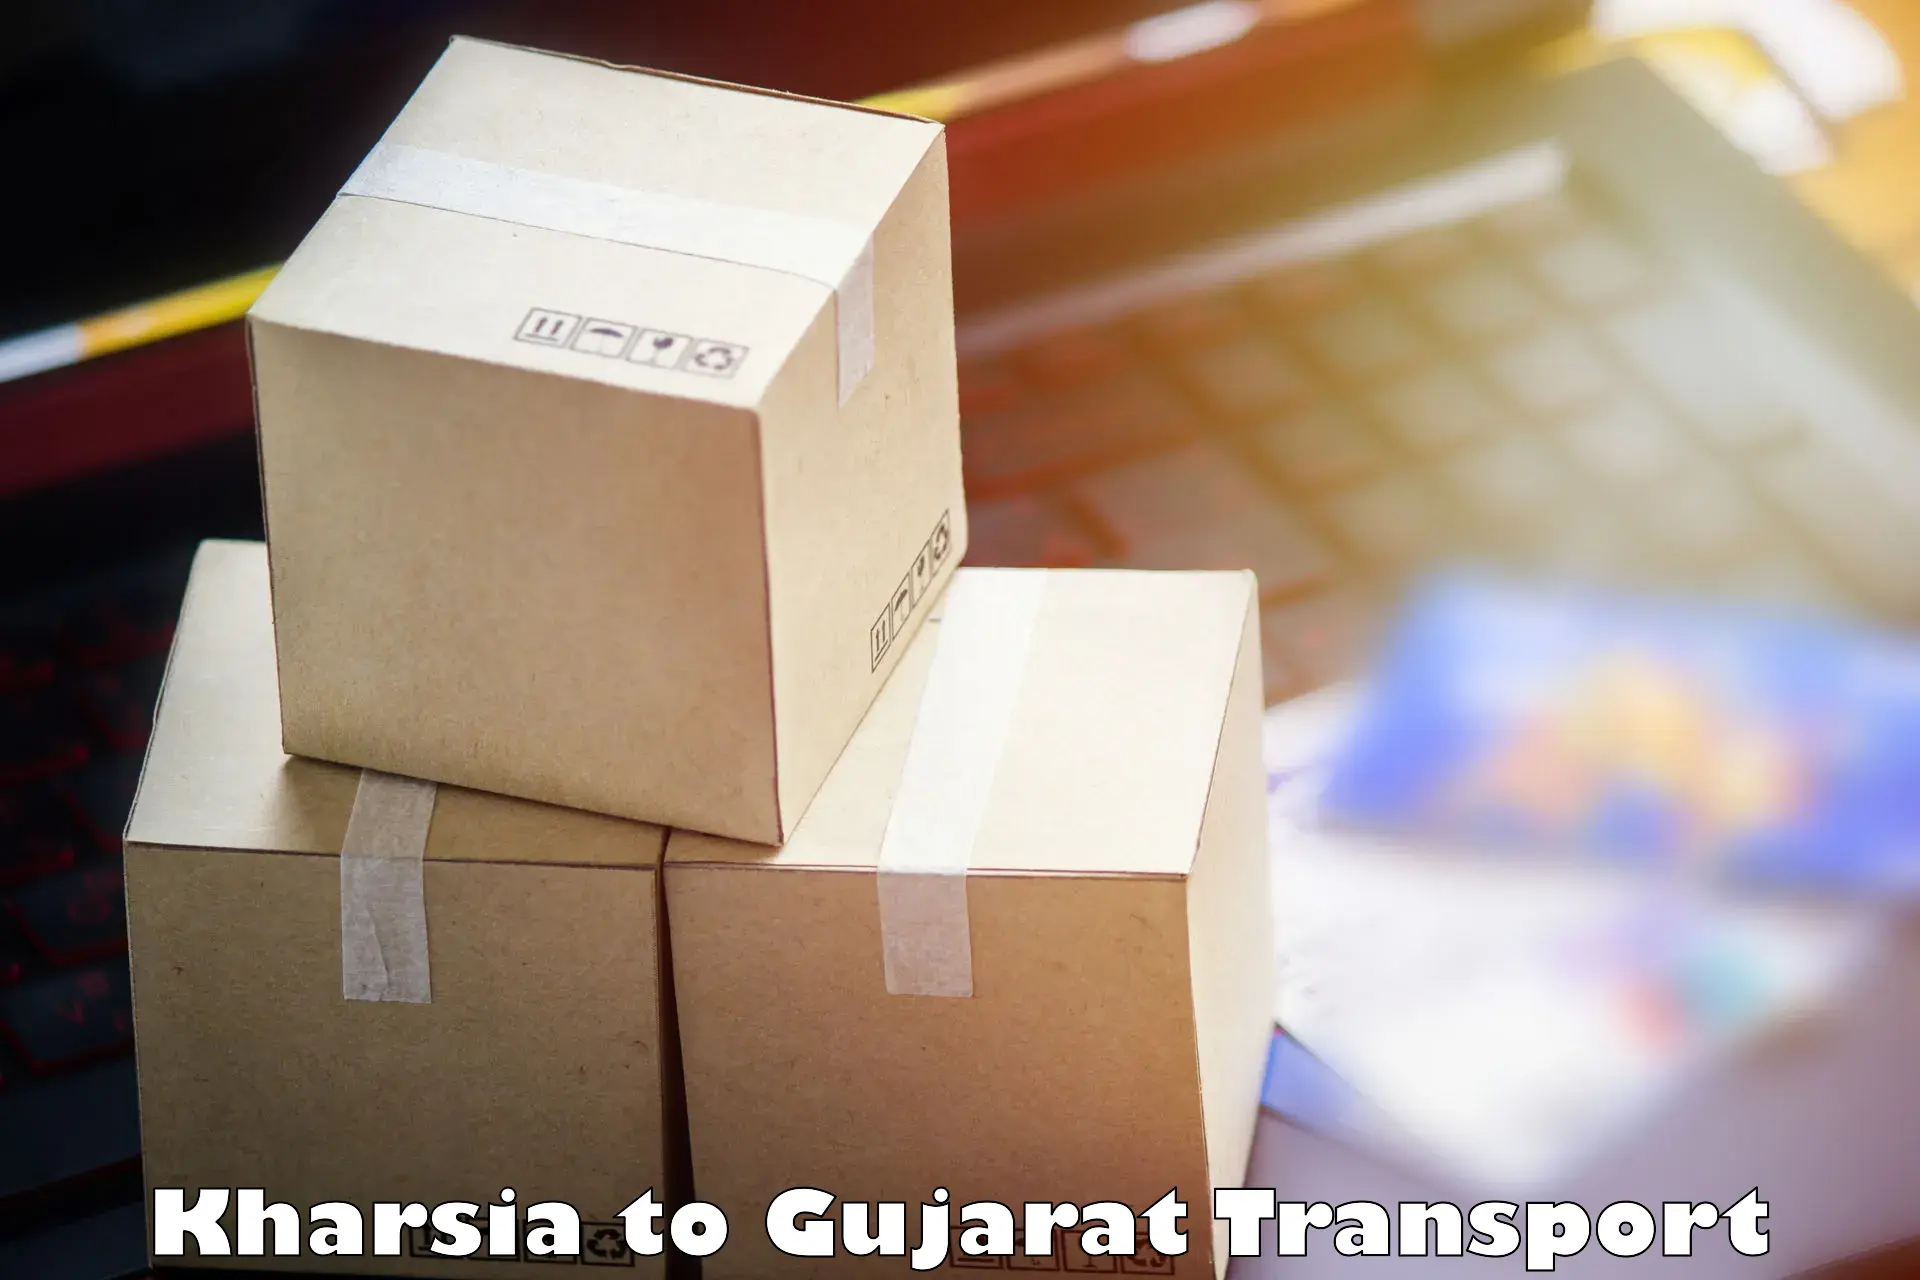 Road transport online services Kharsia to Veraval